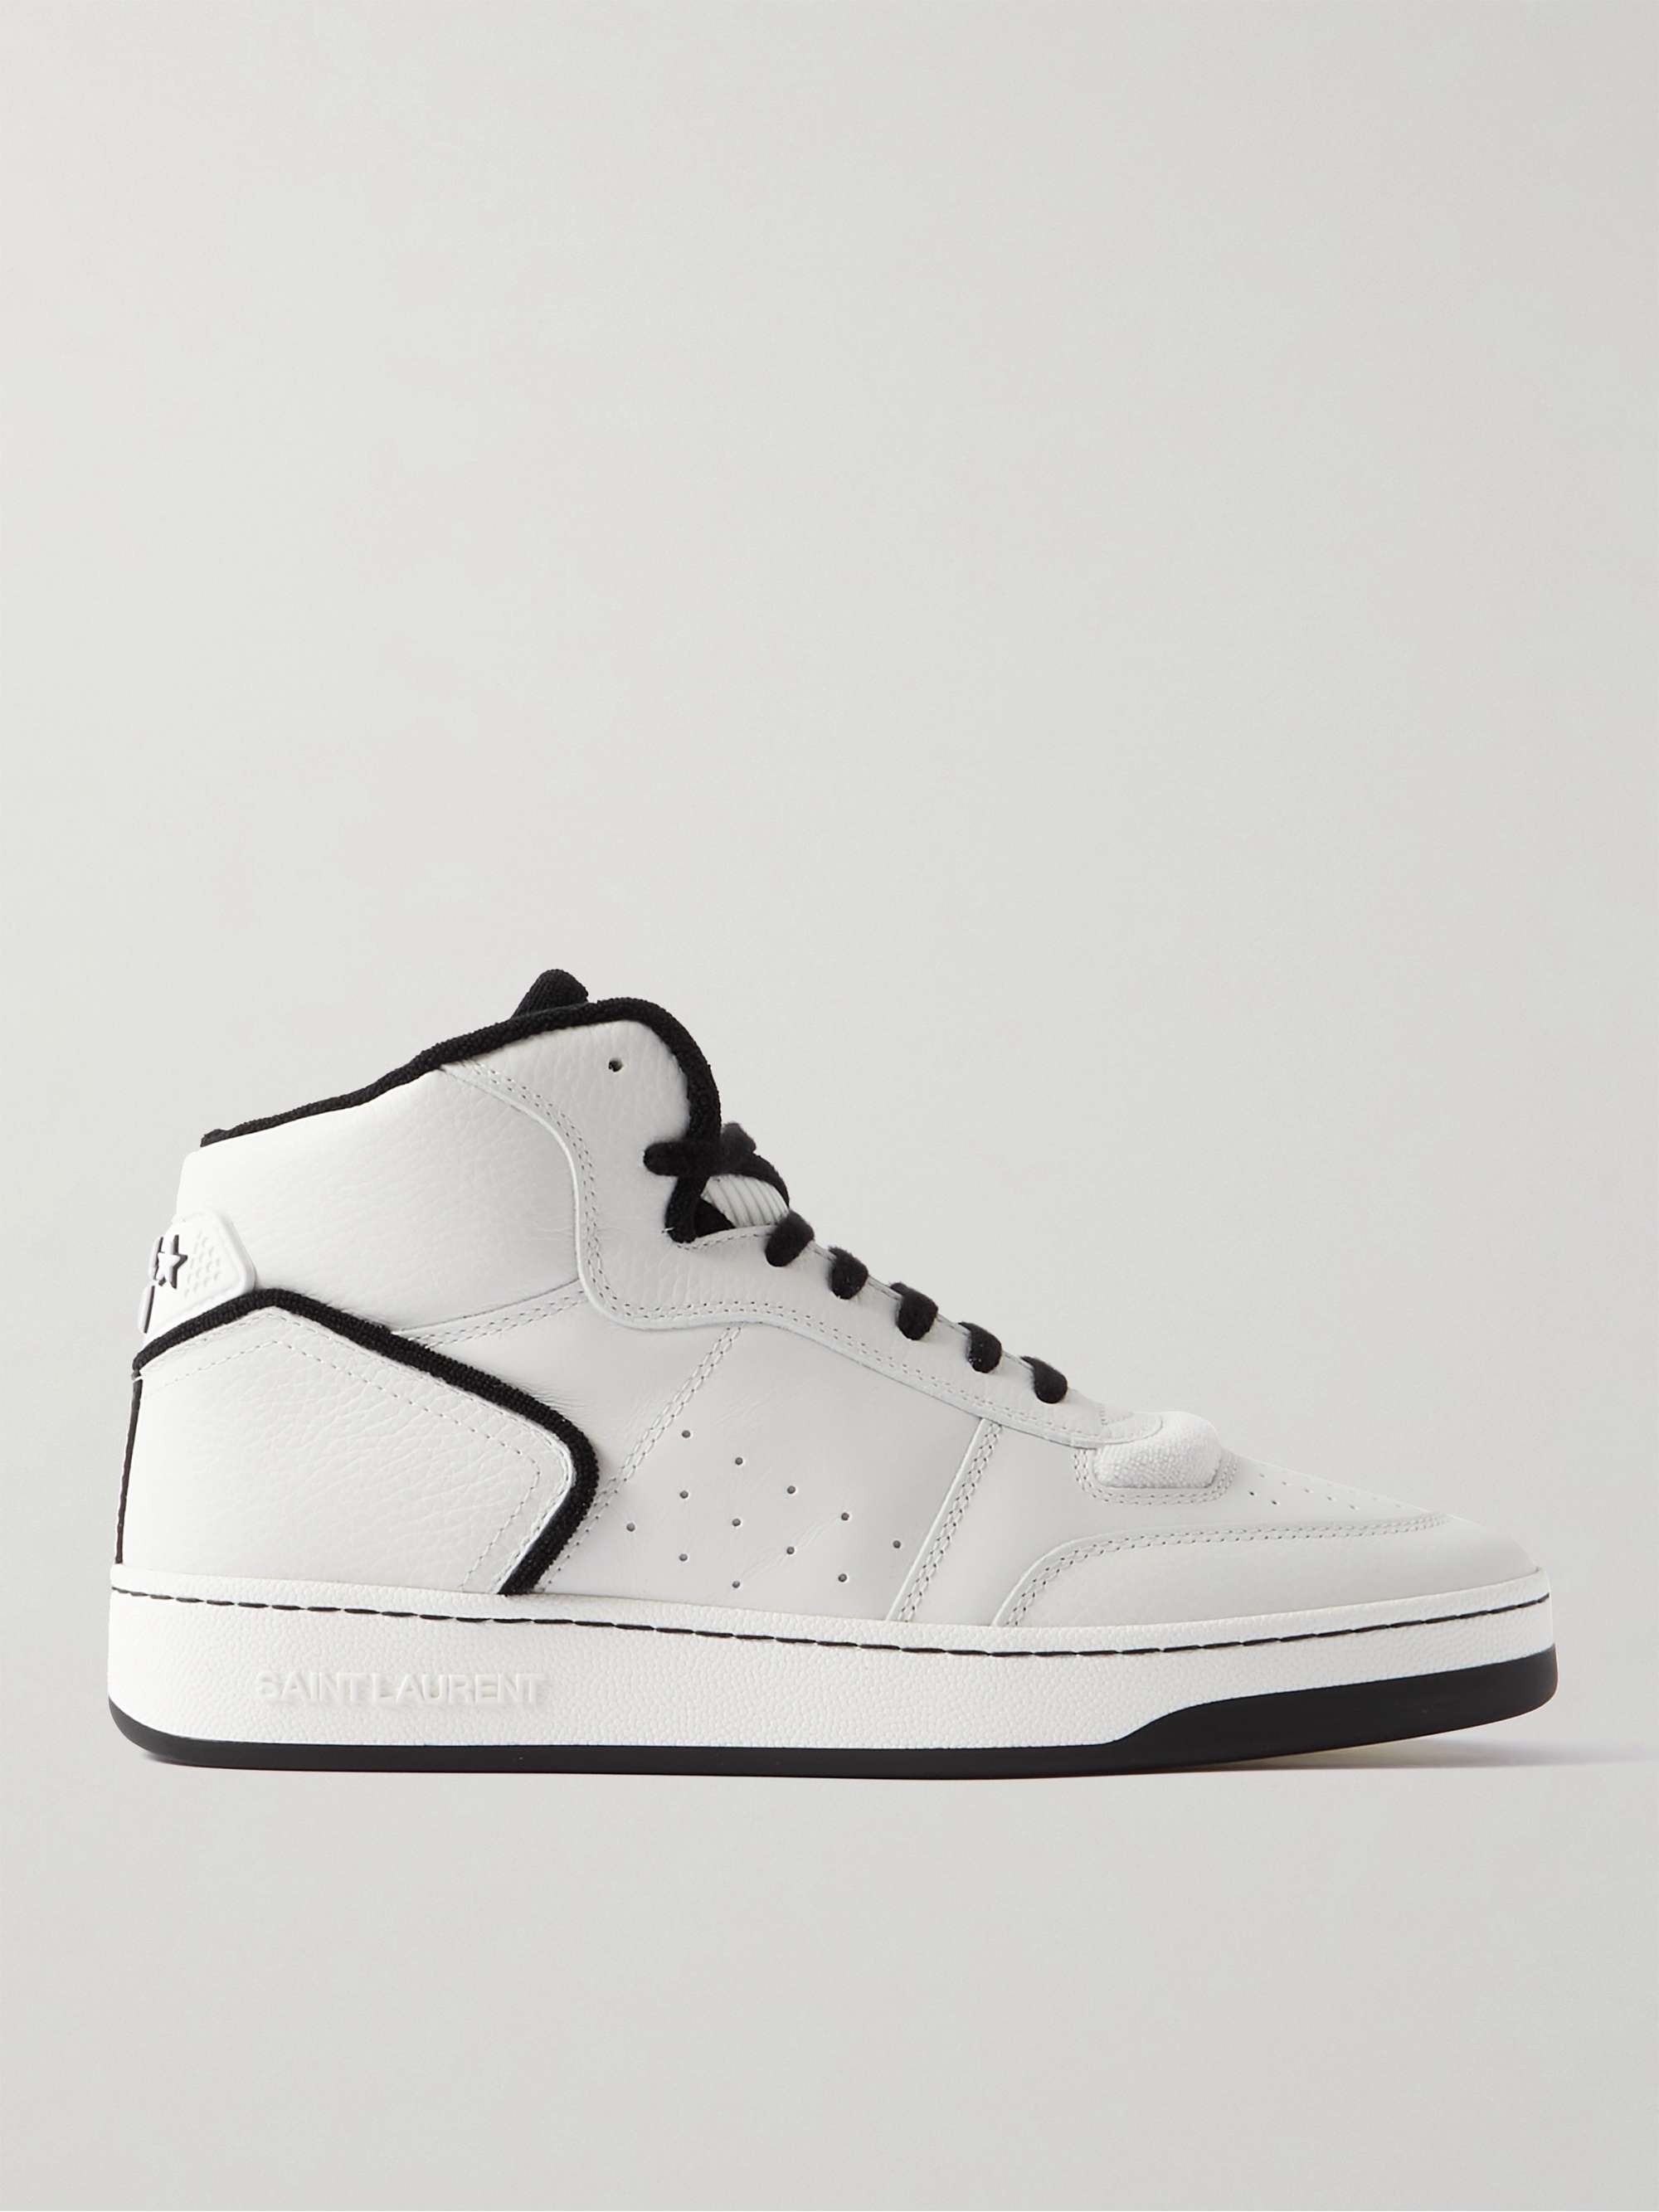 SAINT LAURENT SL/80 Perforated Leather High-Top Sneakers | MR PORTER